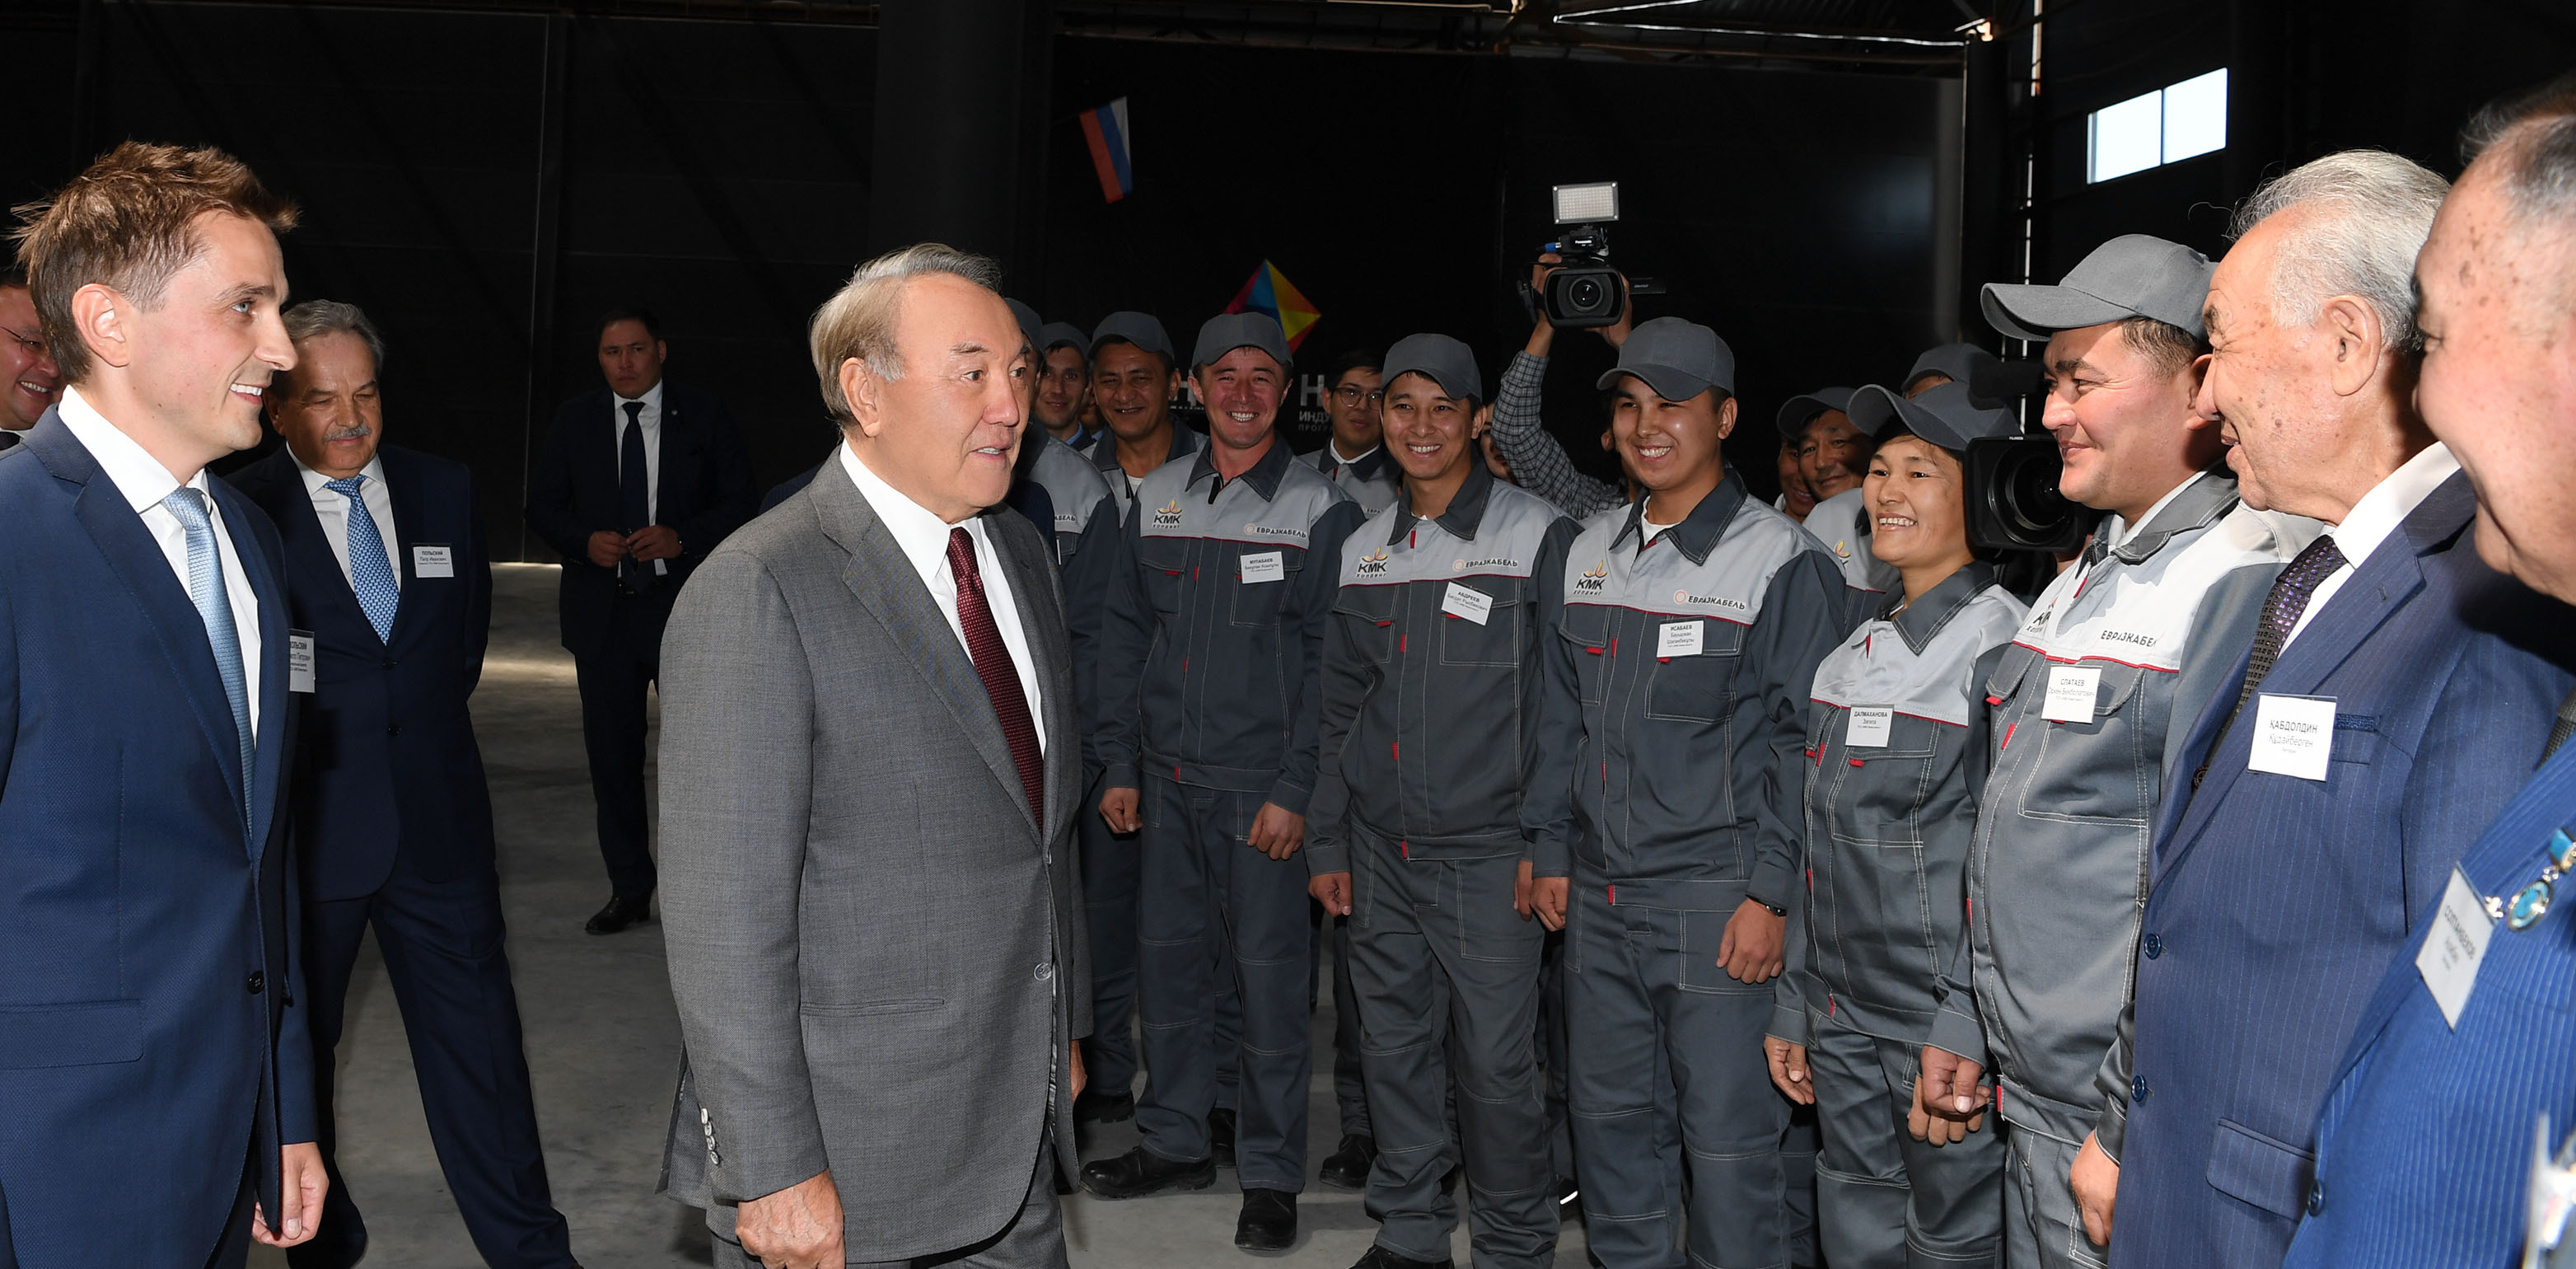 The Head of State visits the industrial zone of Almaty